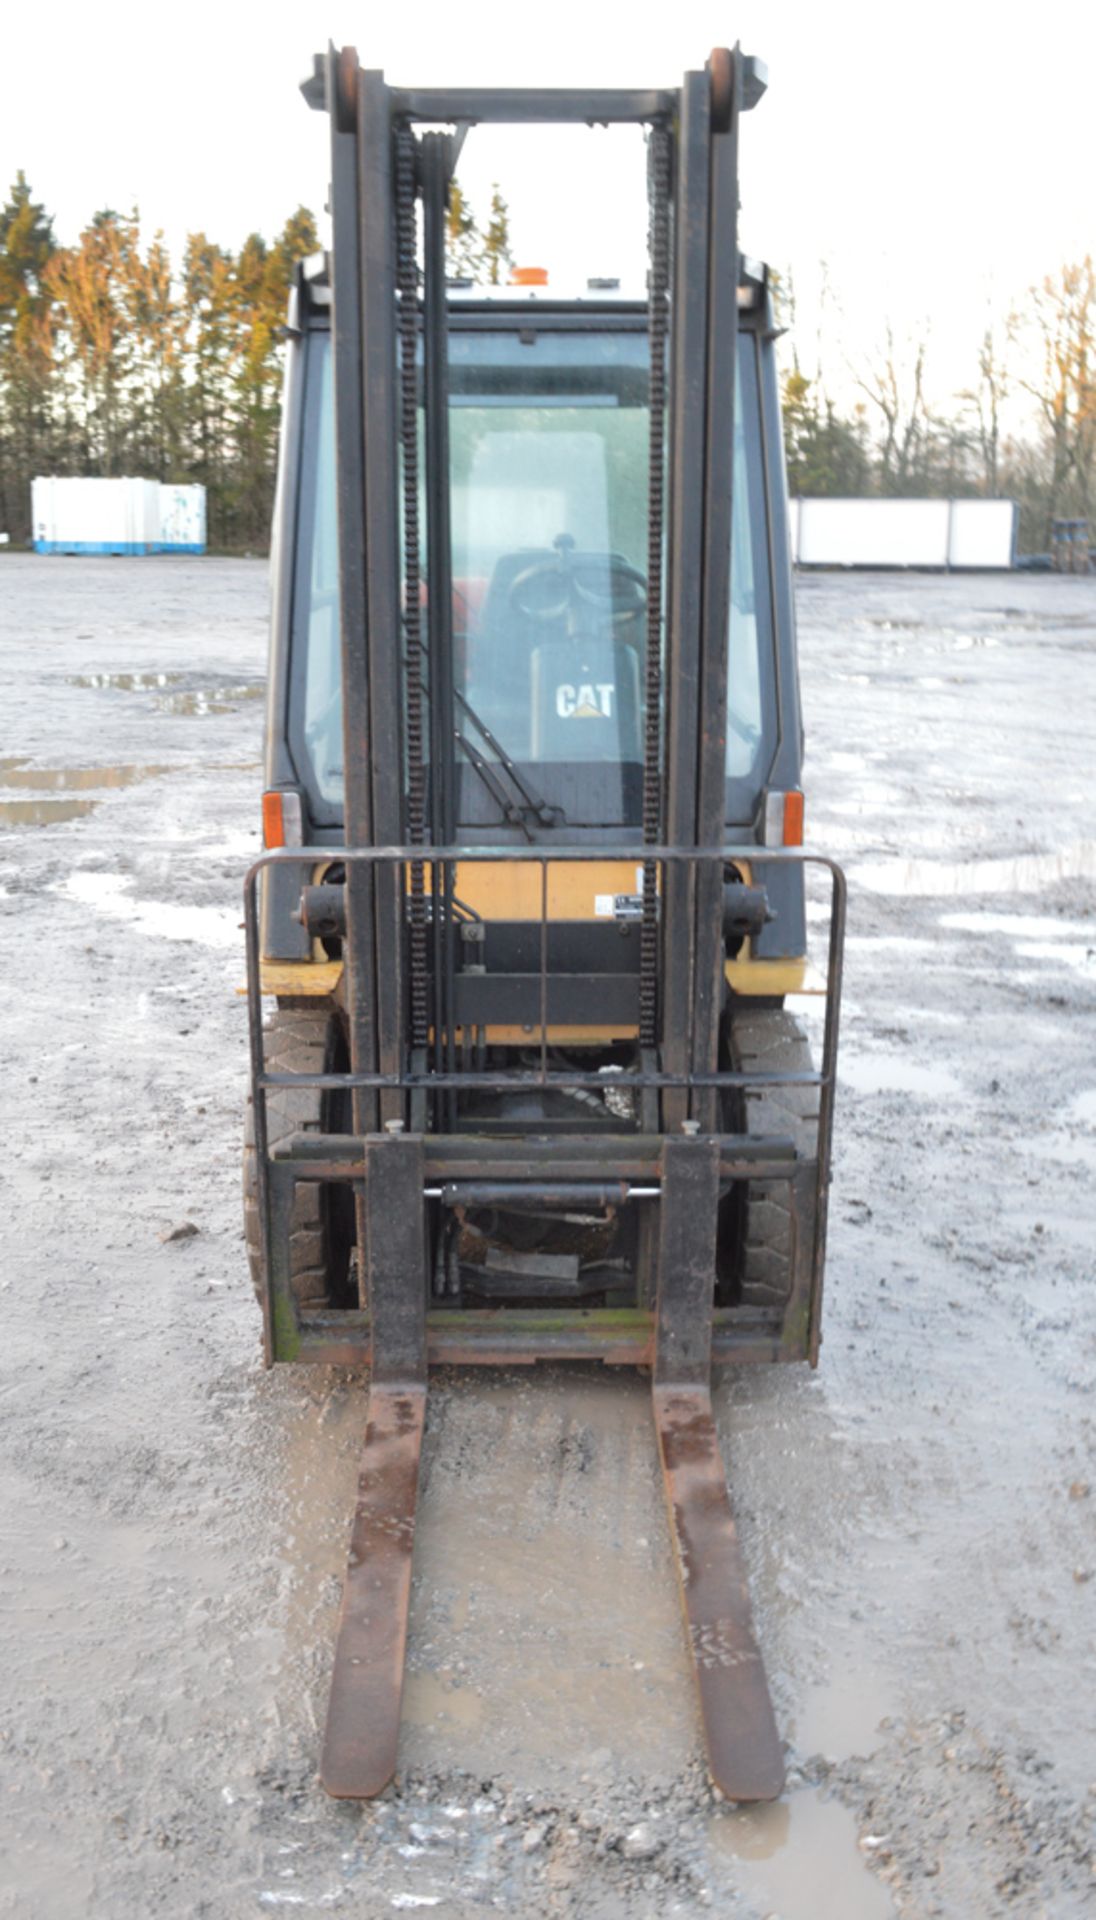 Caterpillar GP25K 2.5 tonne gas powered fork lift truck Year: 2004 S/N: 66657 Recorded Hours: 6234 - Image 5 of 7